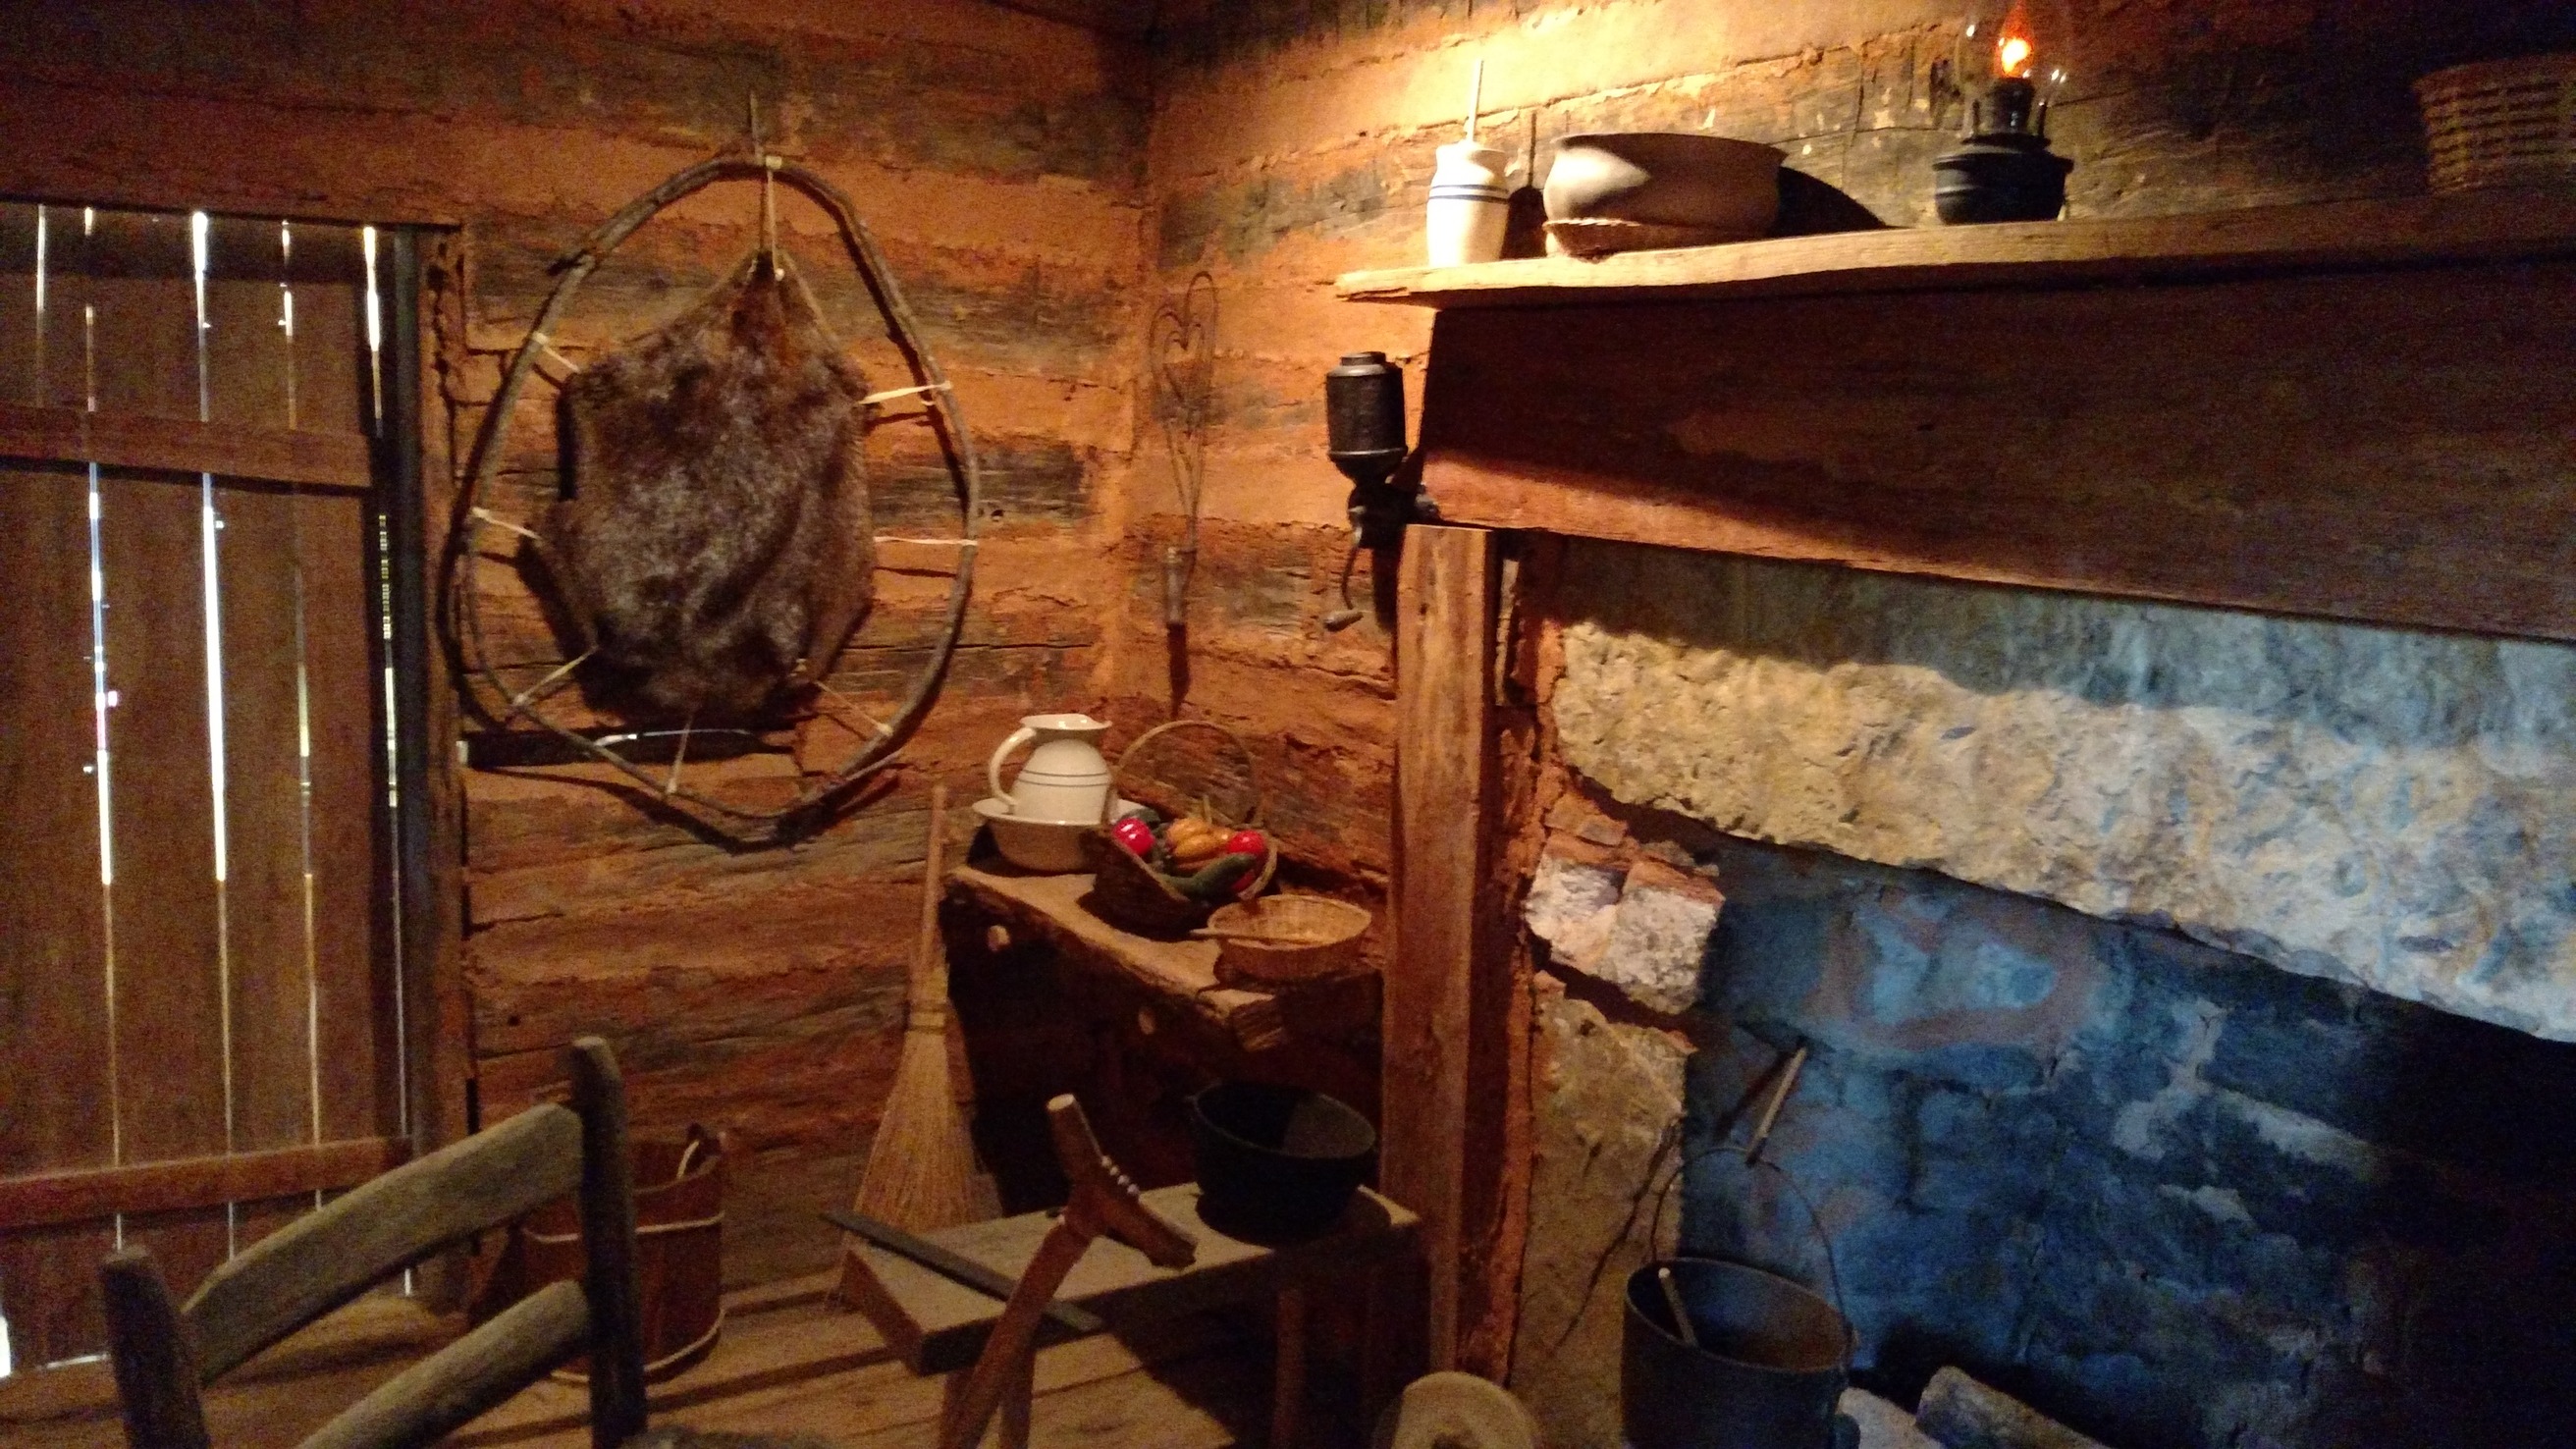 Artifacts and living materials at Sequoyah's Cabin in Sallisaw, Oklahoma